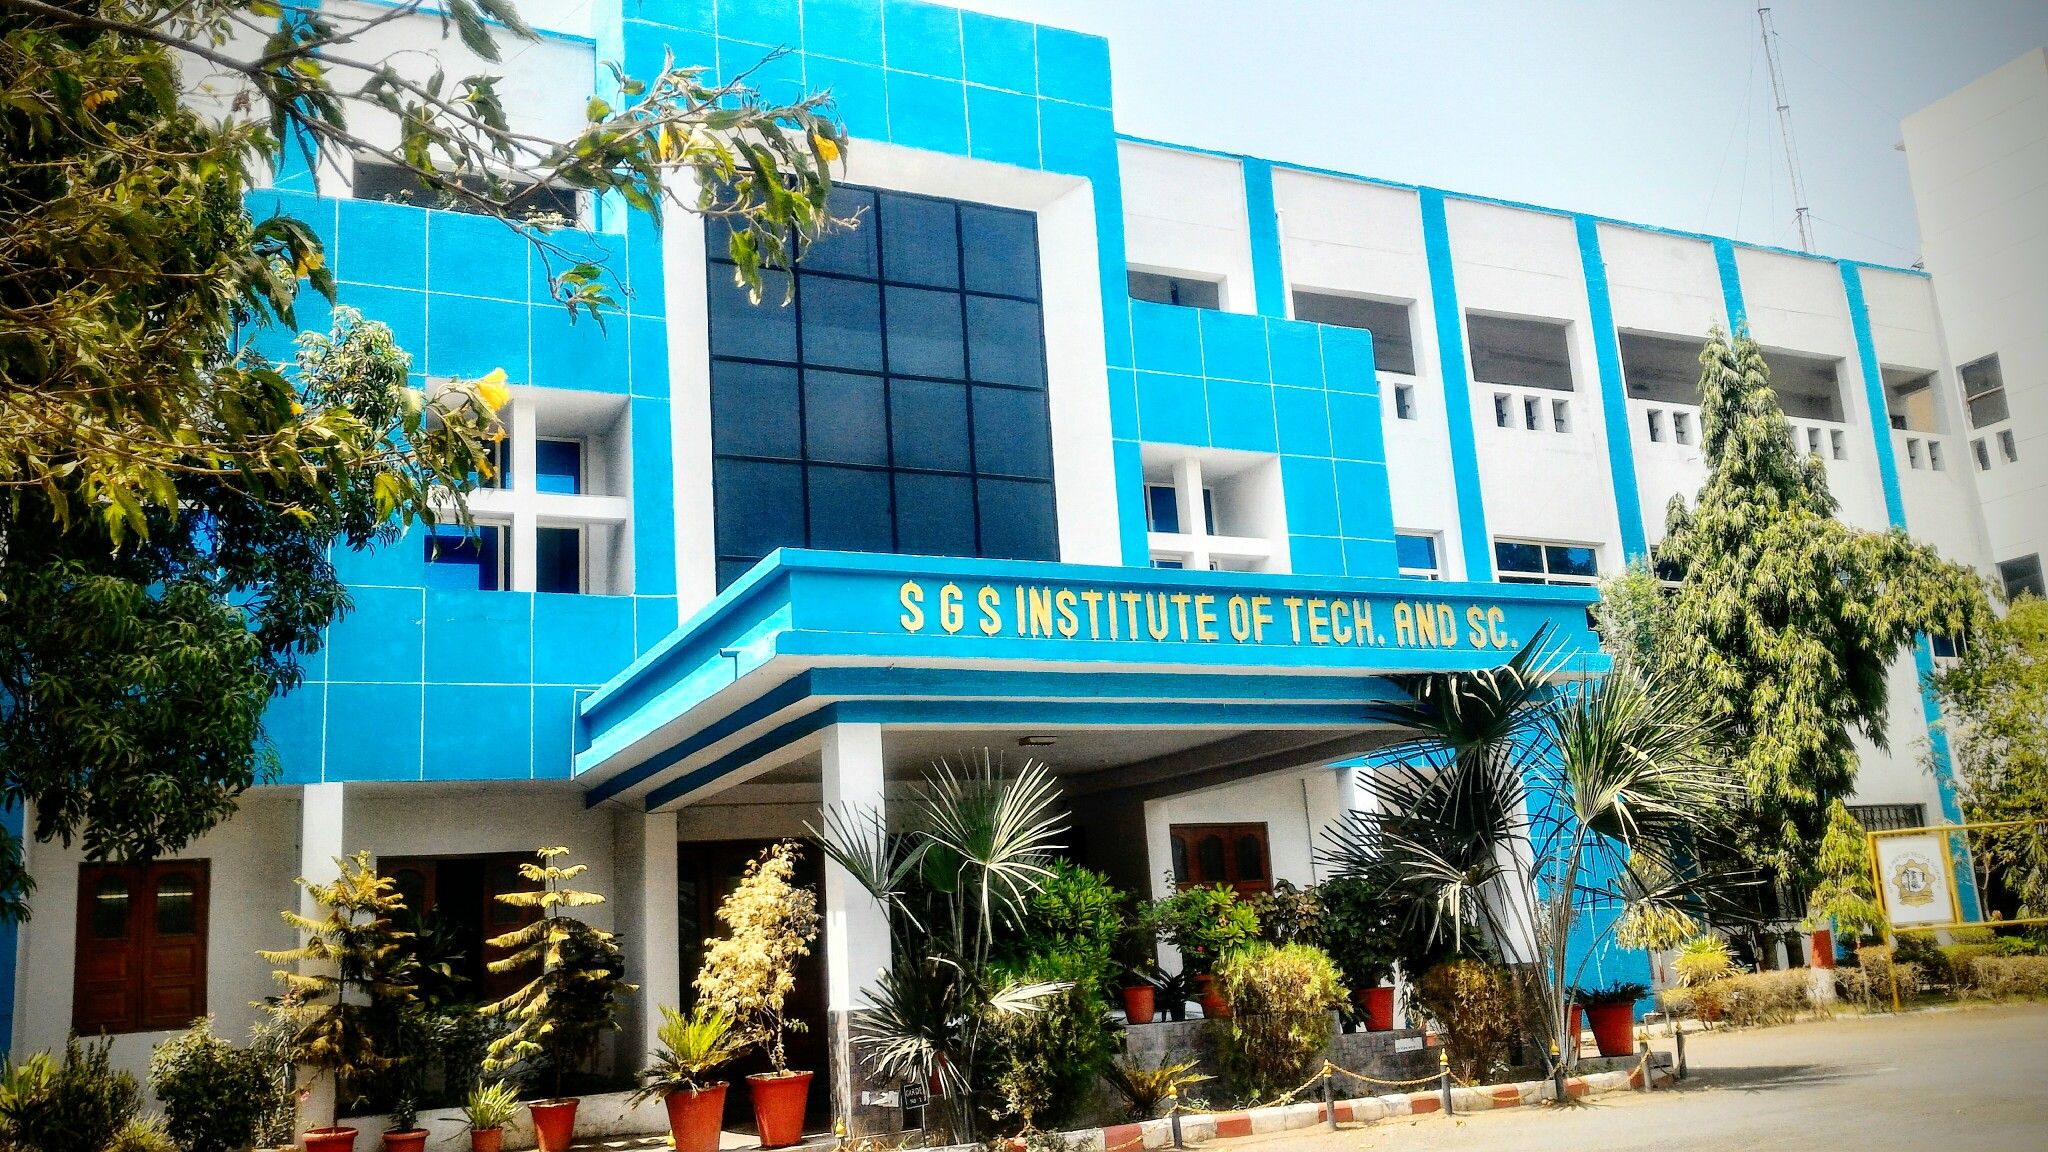 Shri G.S. Institute of Technology and Science Image